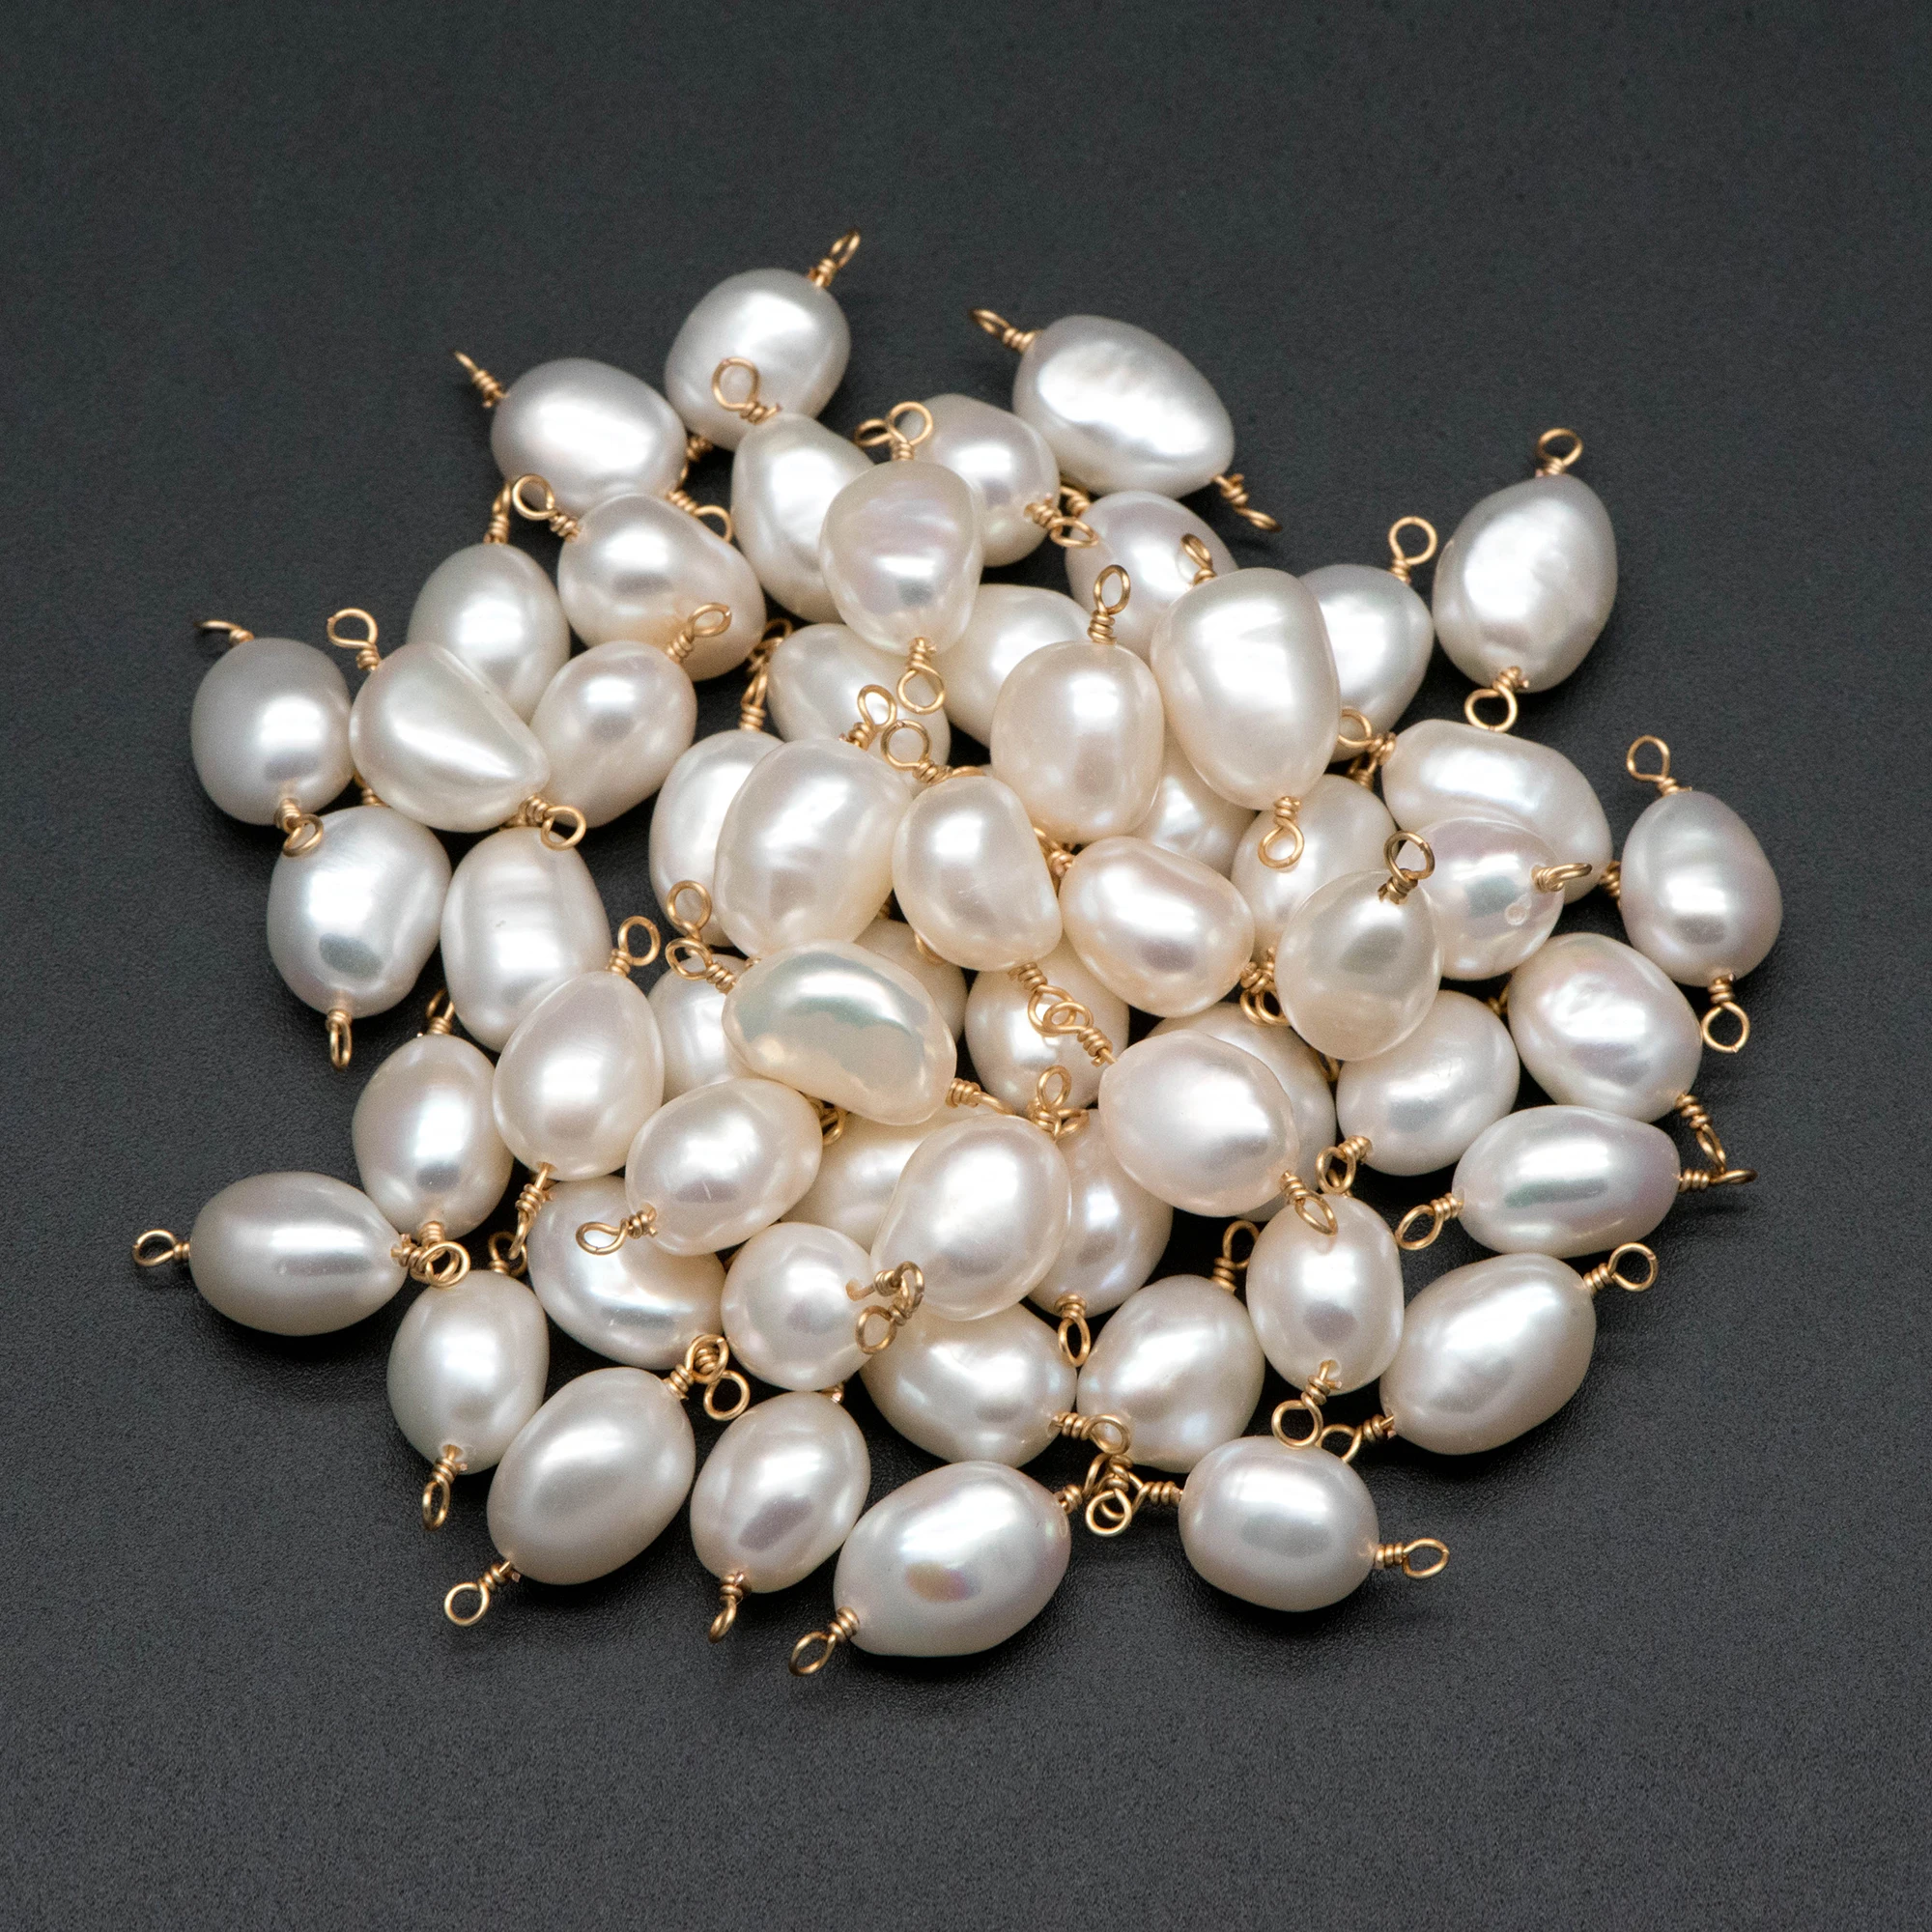 

20pcs Natural Freshwater Pearl Connectors, Genuine Oval Pearl Charm Pendants, Pearl 8-9mm Thick, Gold Wired Pearl Supply (PL-65)